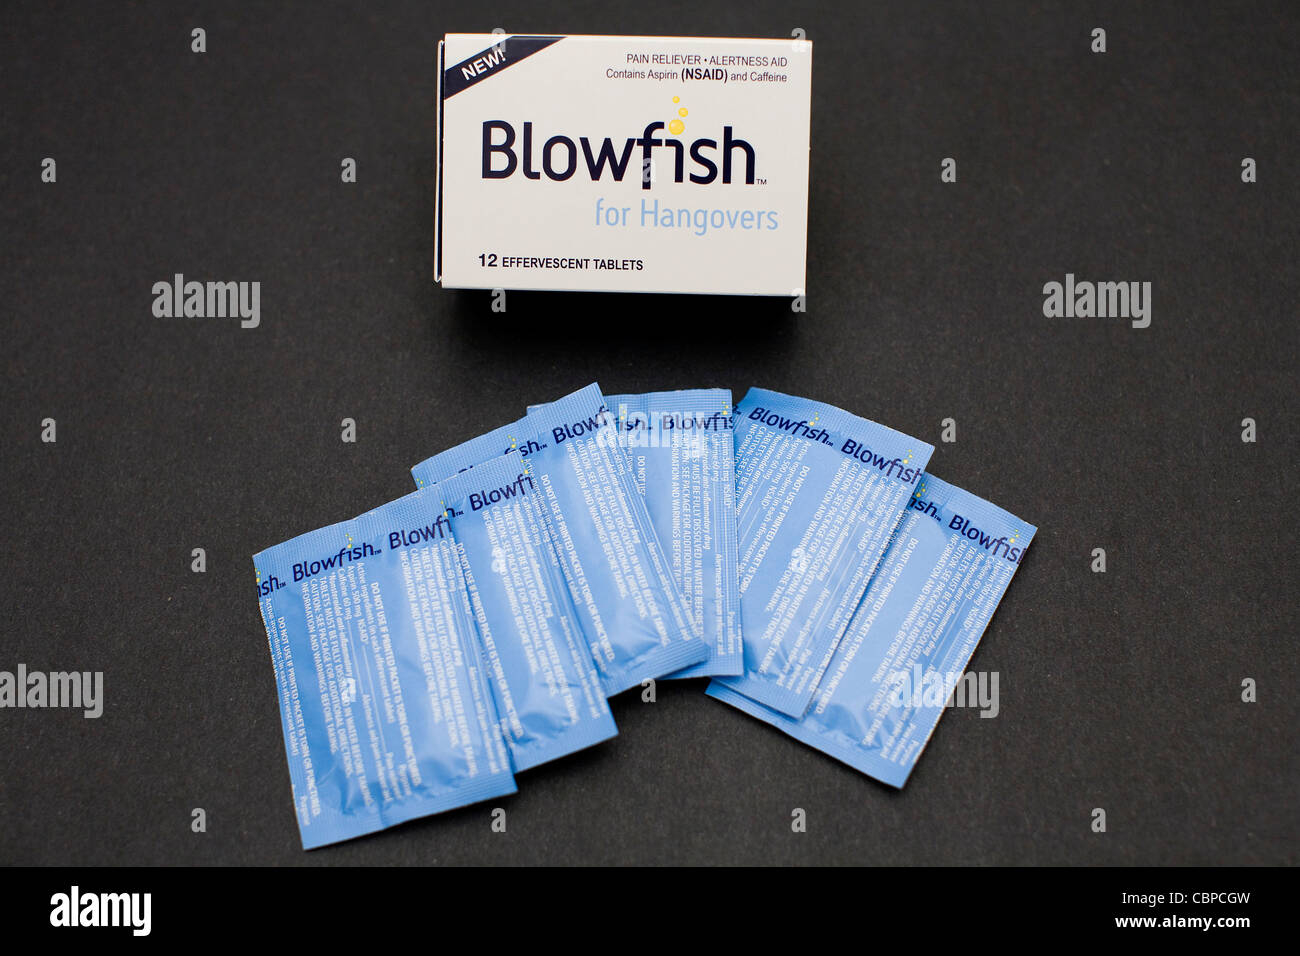 Blowfish- FDA approved hangover cure.  Stock Photo